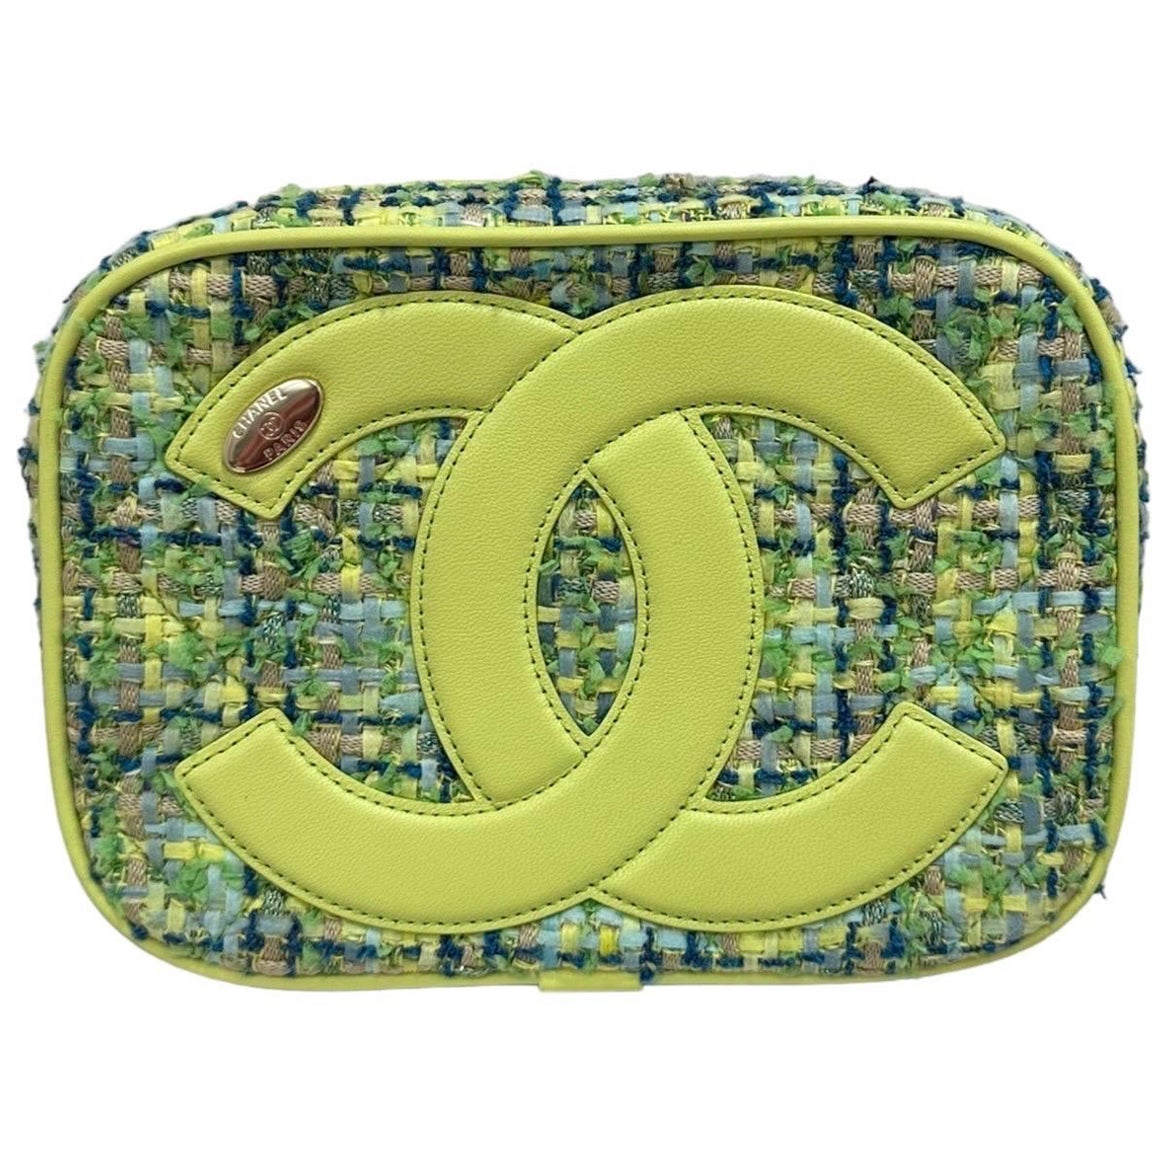 Borsa A Tracolla Chanel Camera Bag Tweed Lime 2019 For Sale